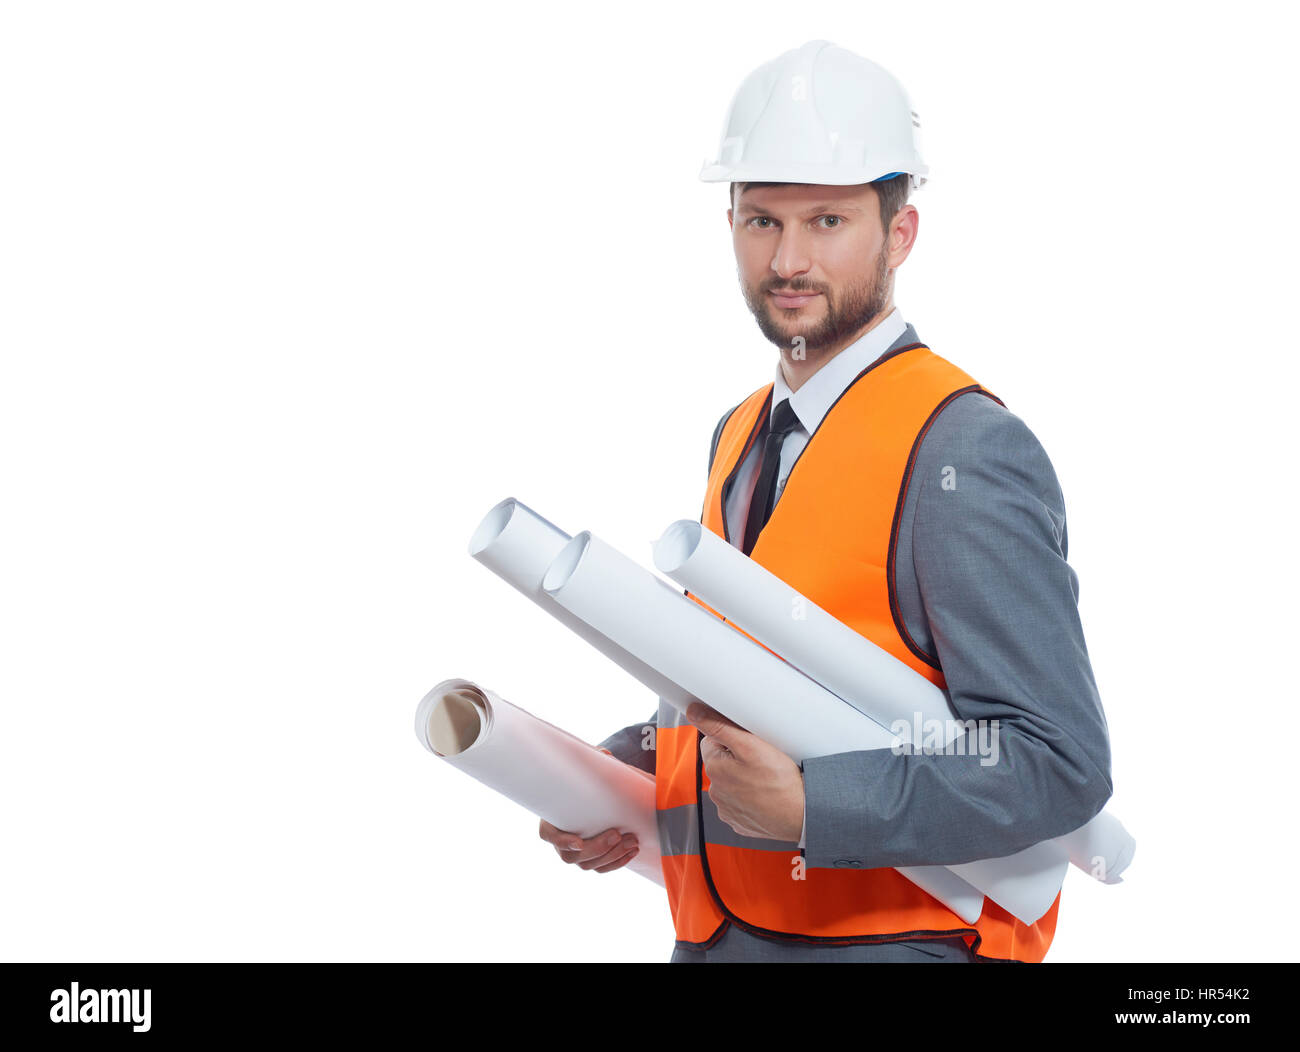 Your professional. Friendly mature businessman construction foreman smiling confidently holding blueprints wearing protective hardhat and safety vest  Stock Photo